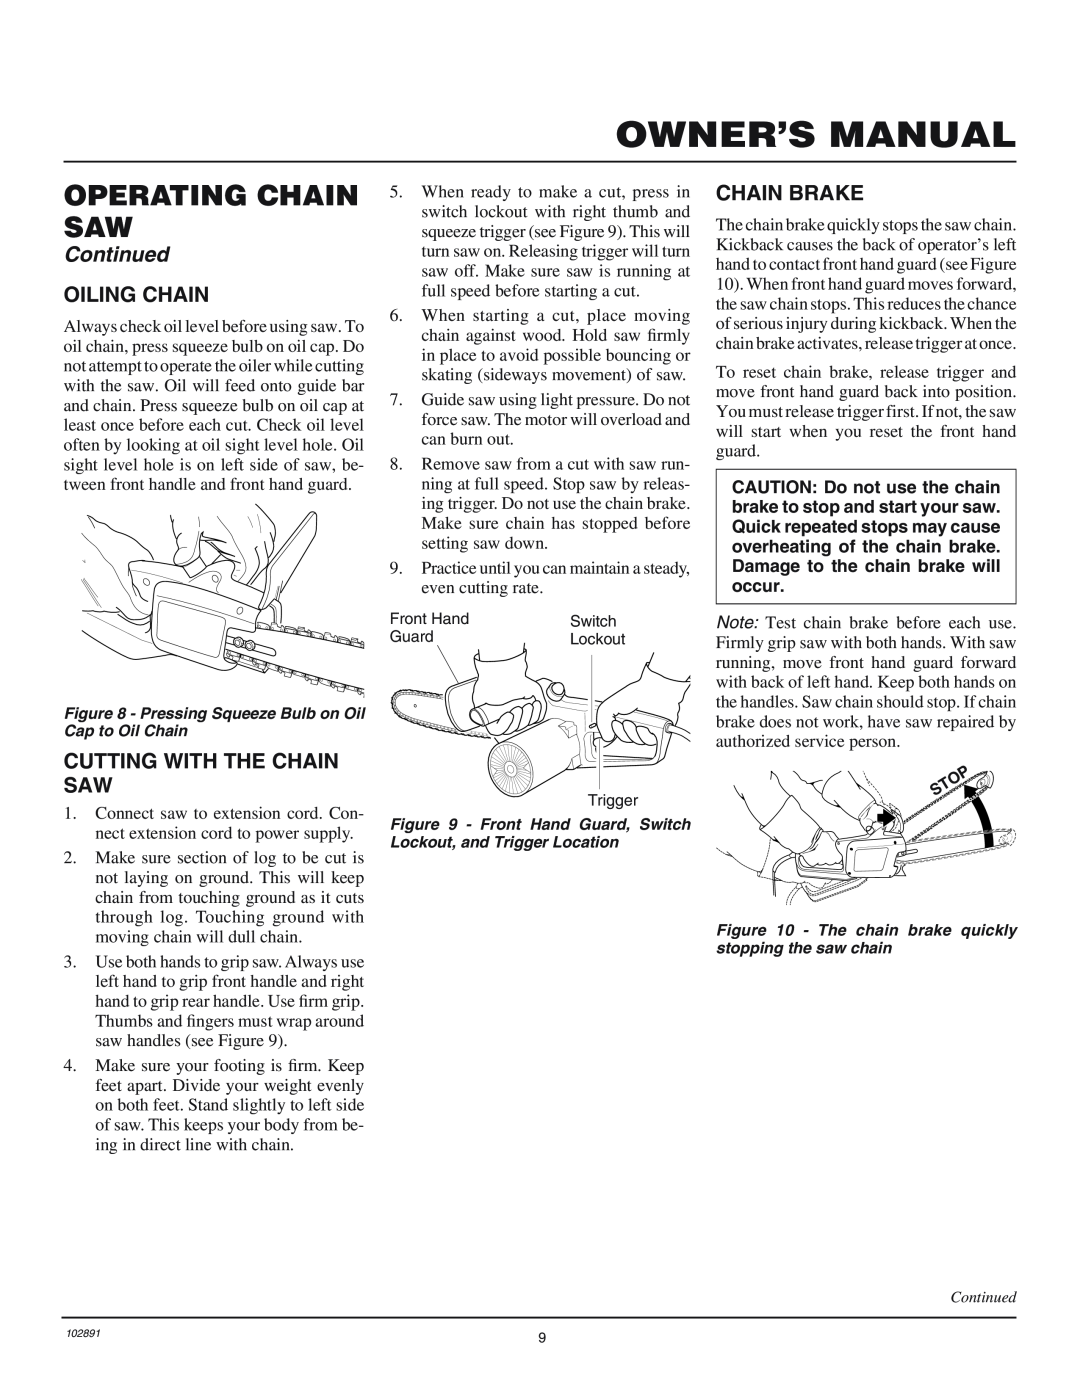 Desa 100271-01 Oiling Chain, Chain Brake, Cutting With The Chain Saw, Owner’S Manual, Operating Chain Saw, Continued 